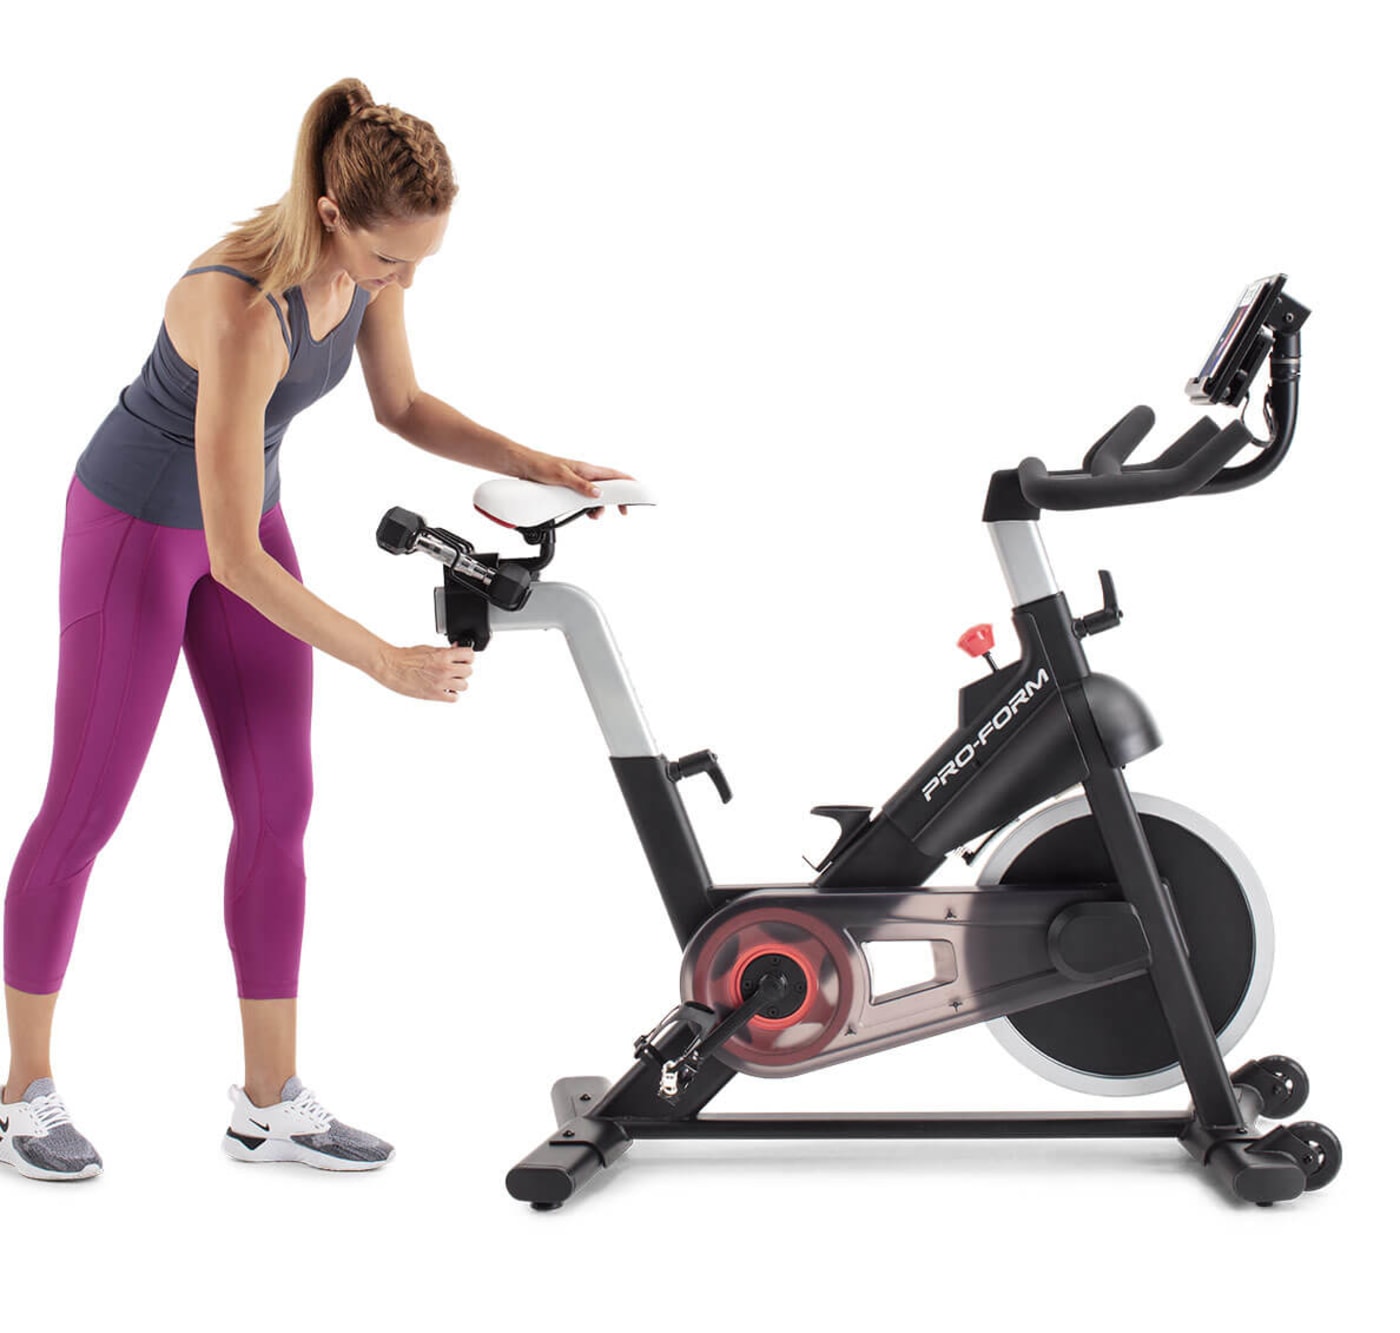 image showing adjustable features of the exercise bike